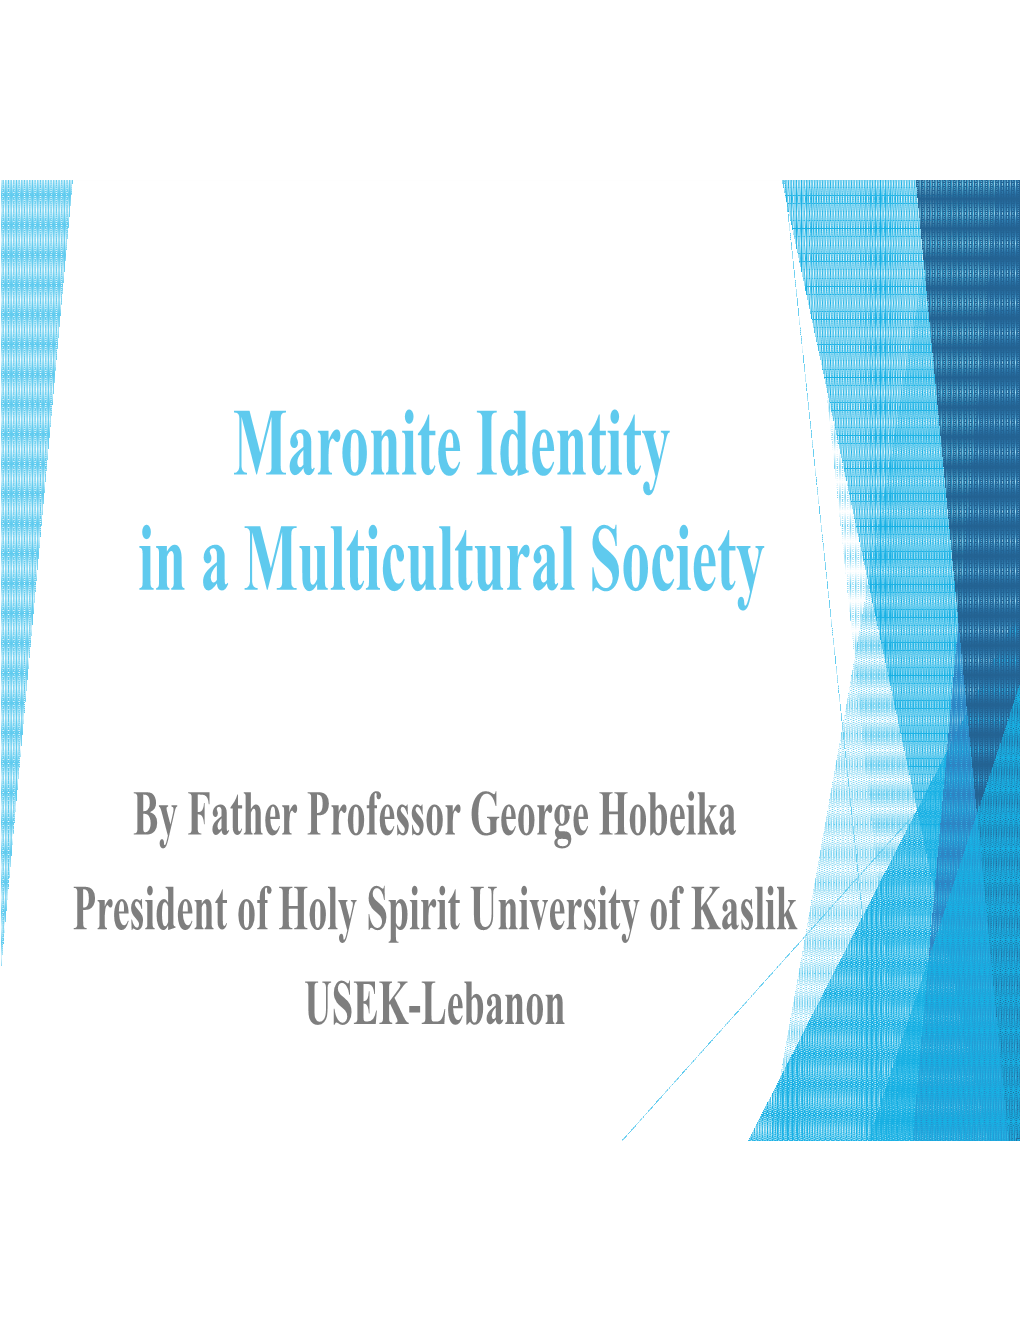 Maronite Identity in a Multicultural Society